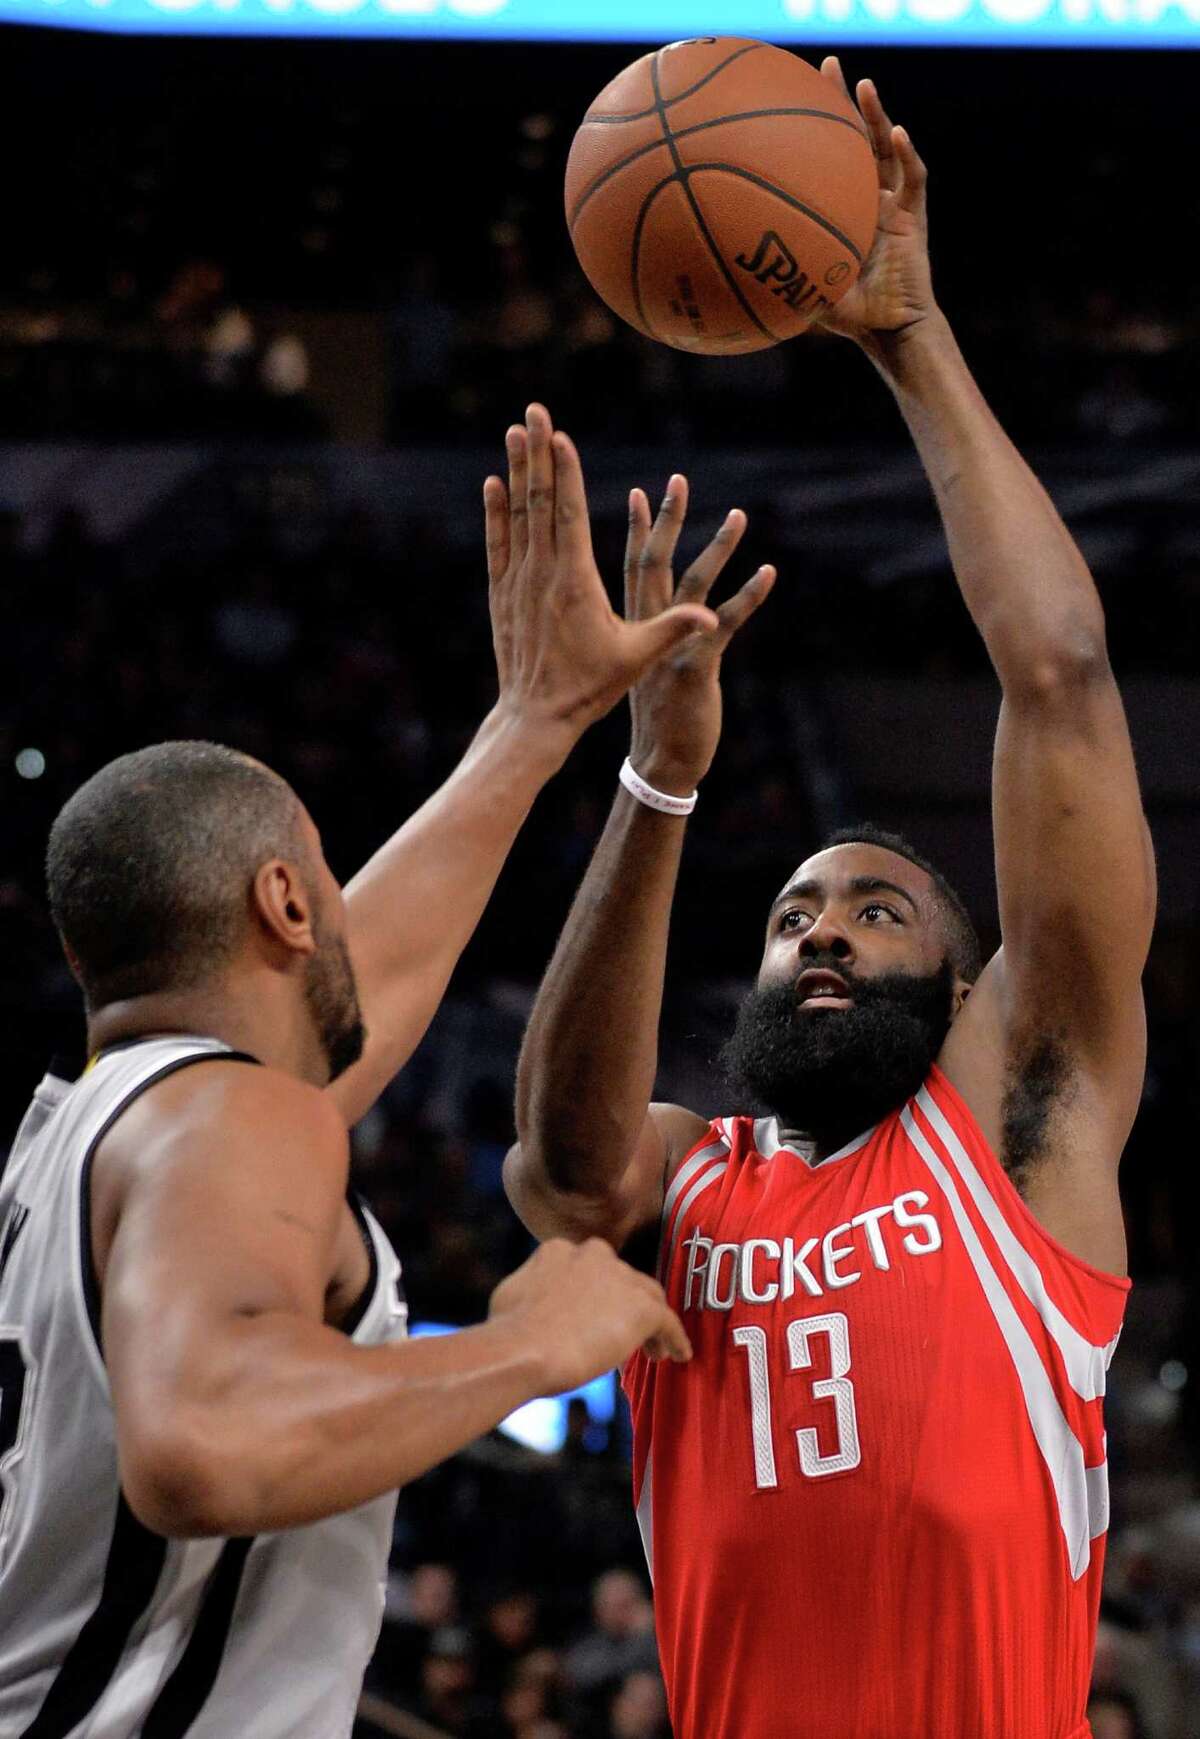 James Harden scored 17 points before sitting out the fourth quarter.